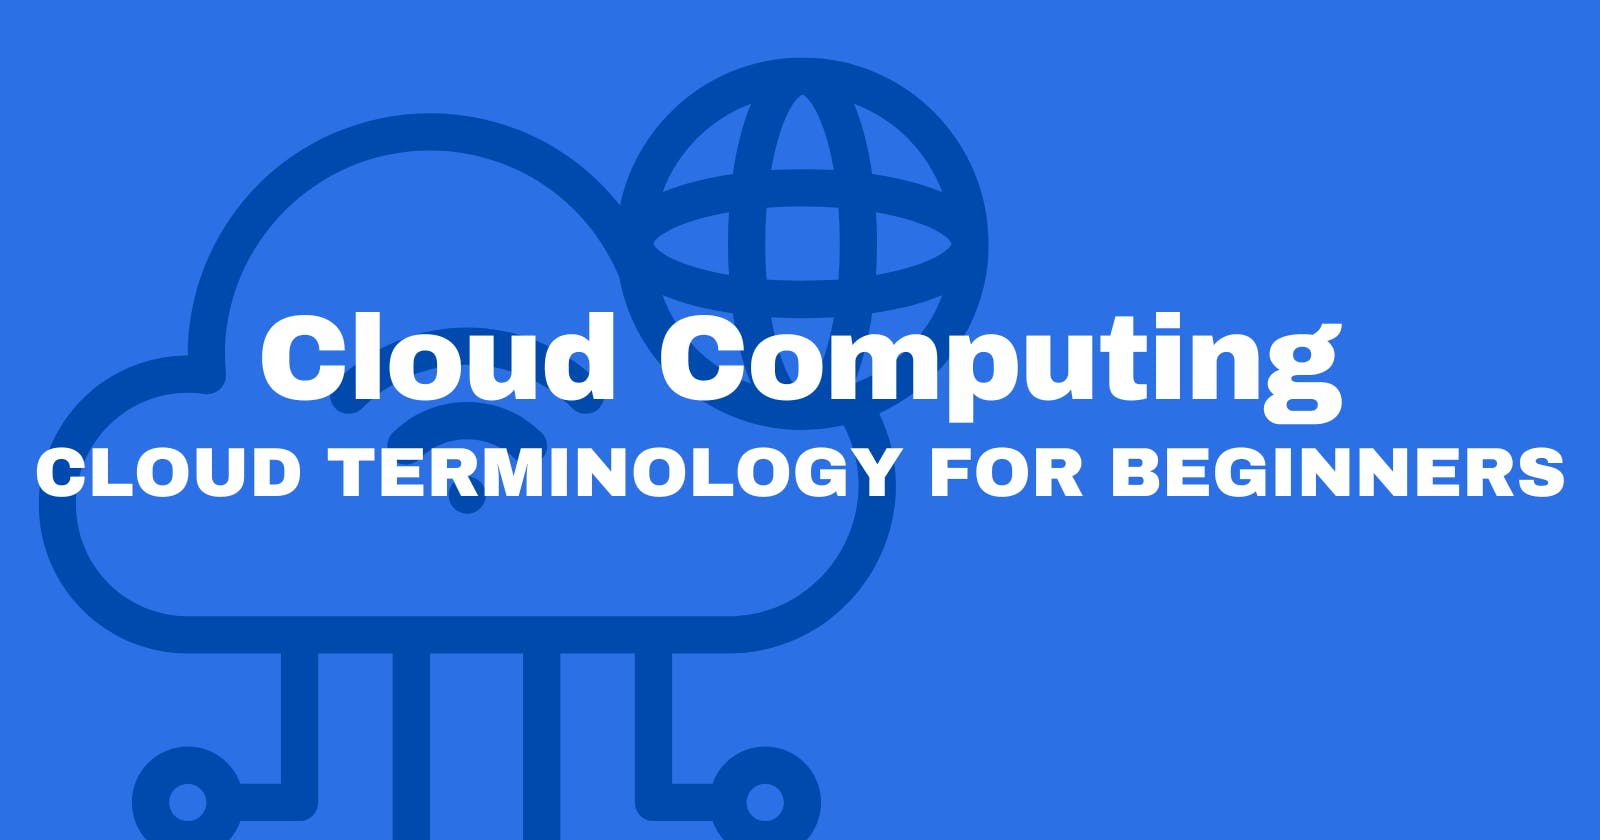 Cloud Terminology for Beginners: A Straight-Up Guide